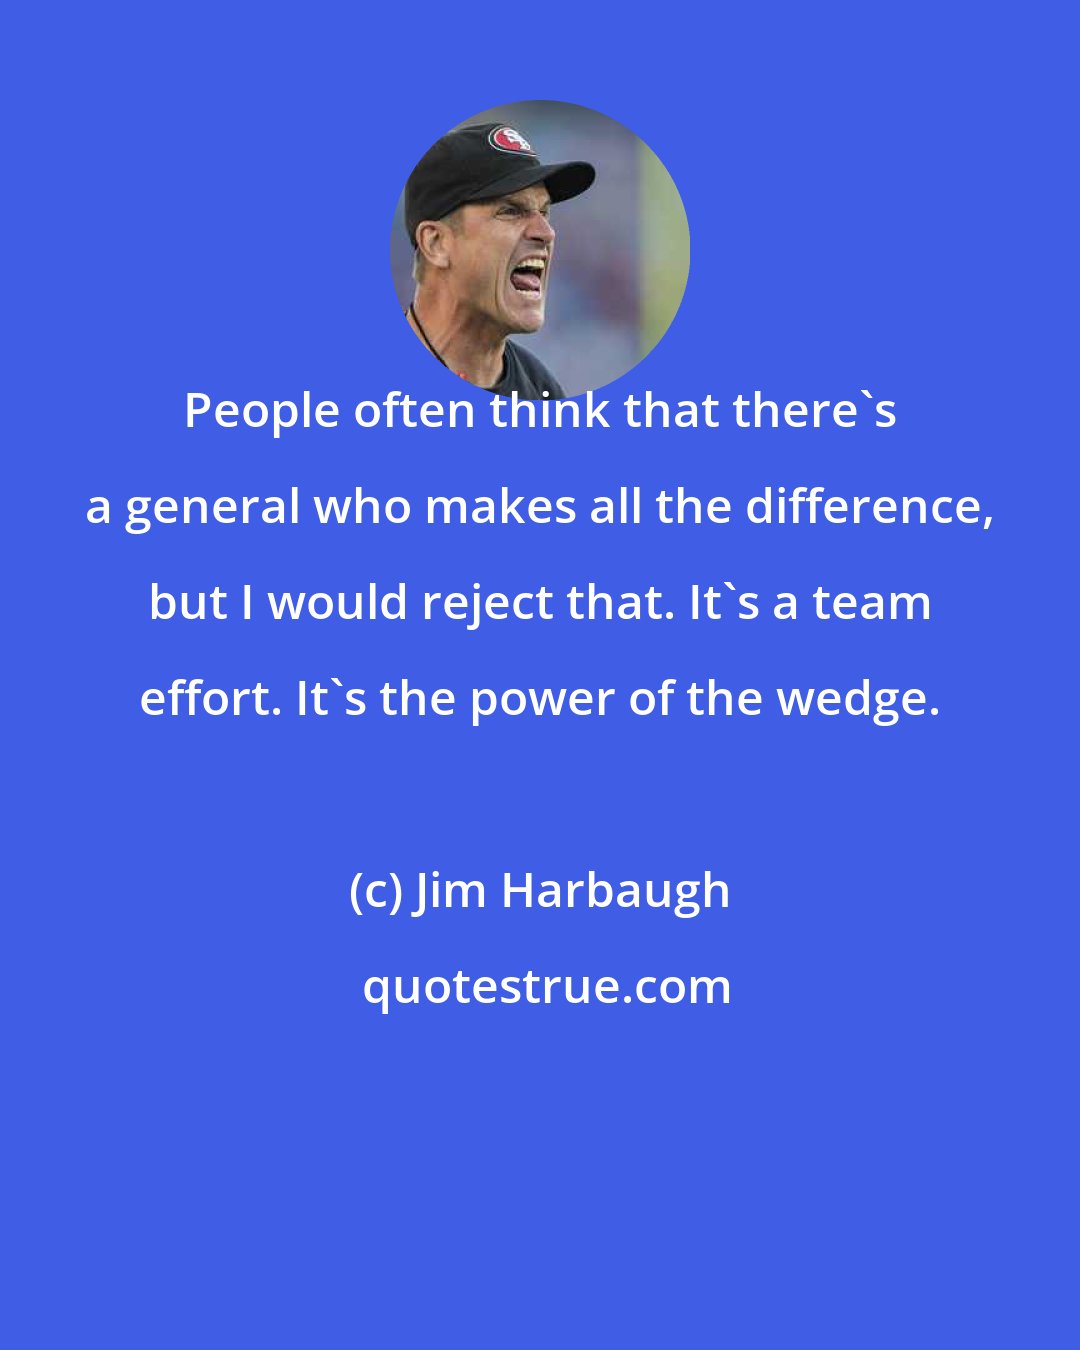 Jim Harbaugh: People often think that there's a general who makes all the difference, but I would reject that. It's a team effort. It's the power of the wedge.